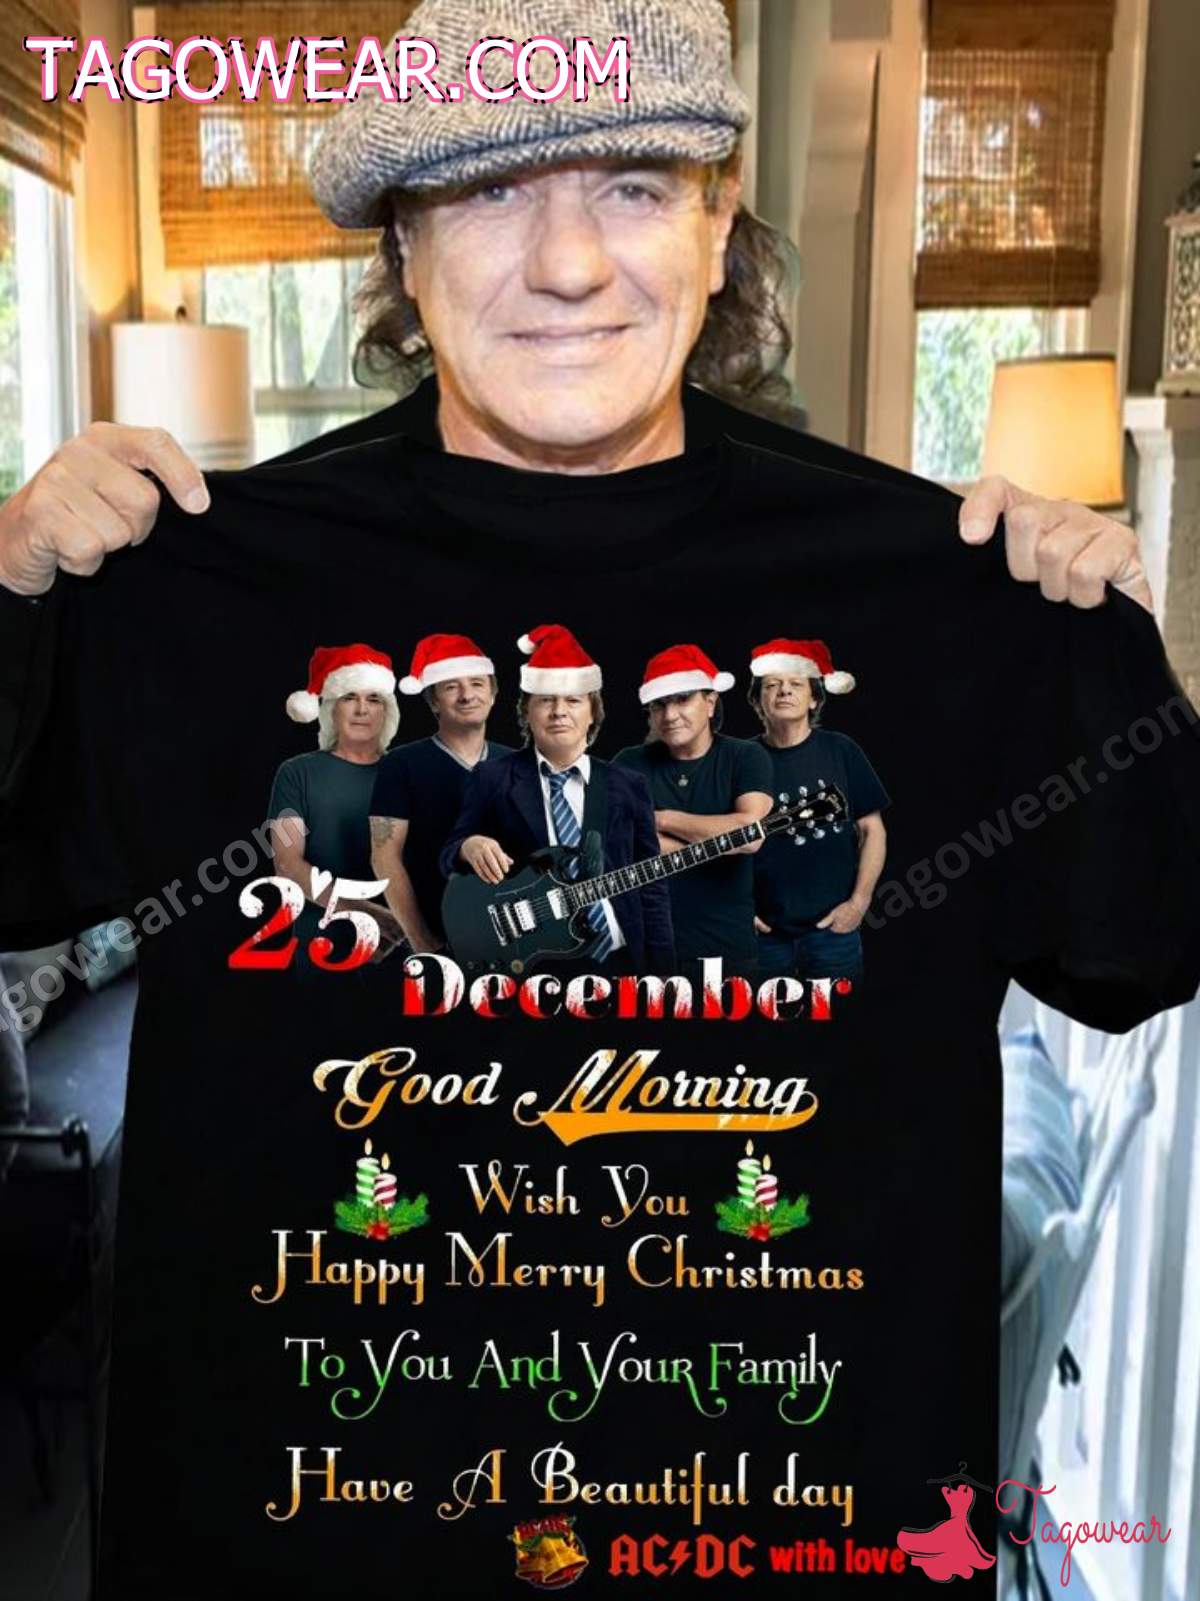 25 December Good Morning Wish You Happy Merry Christmas Ac Dc With Love Shirt